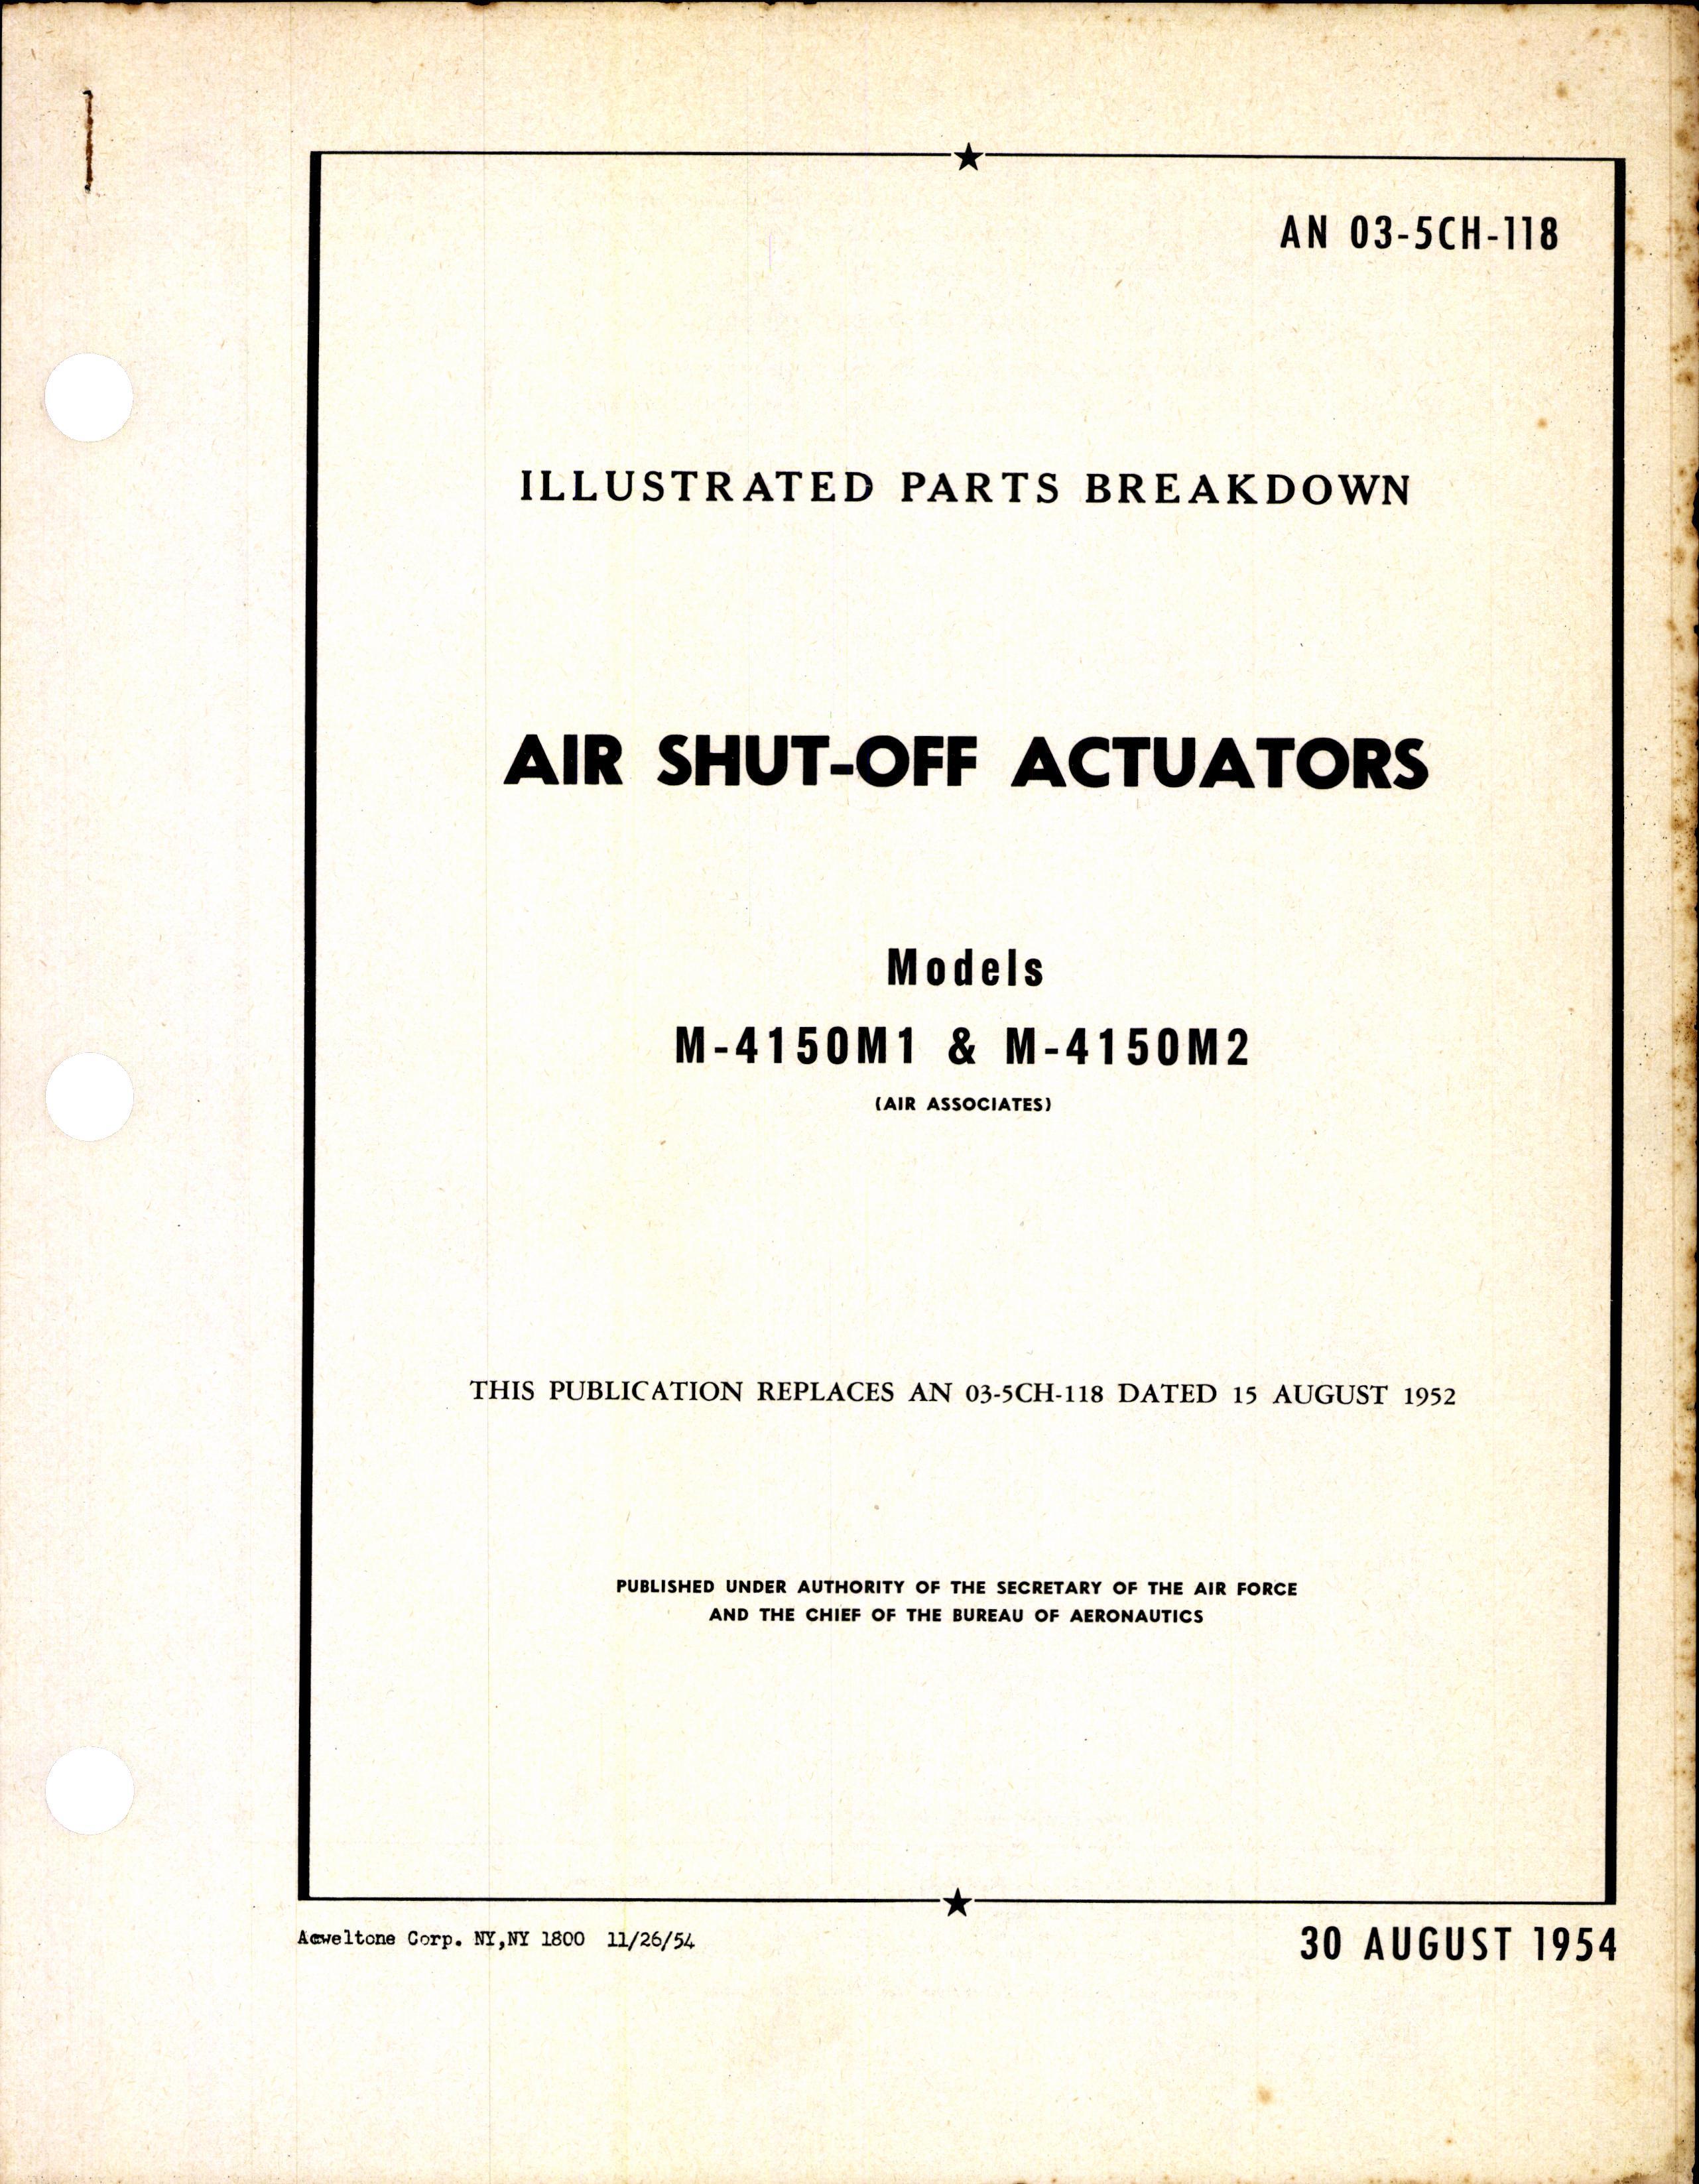 Sample page 1 from AirCorps Library document: Parts Breakdown for Air Shut-Off Actuators Models